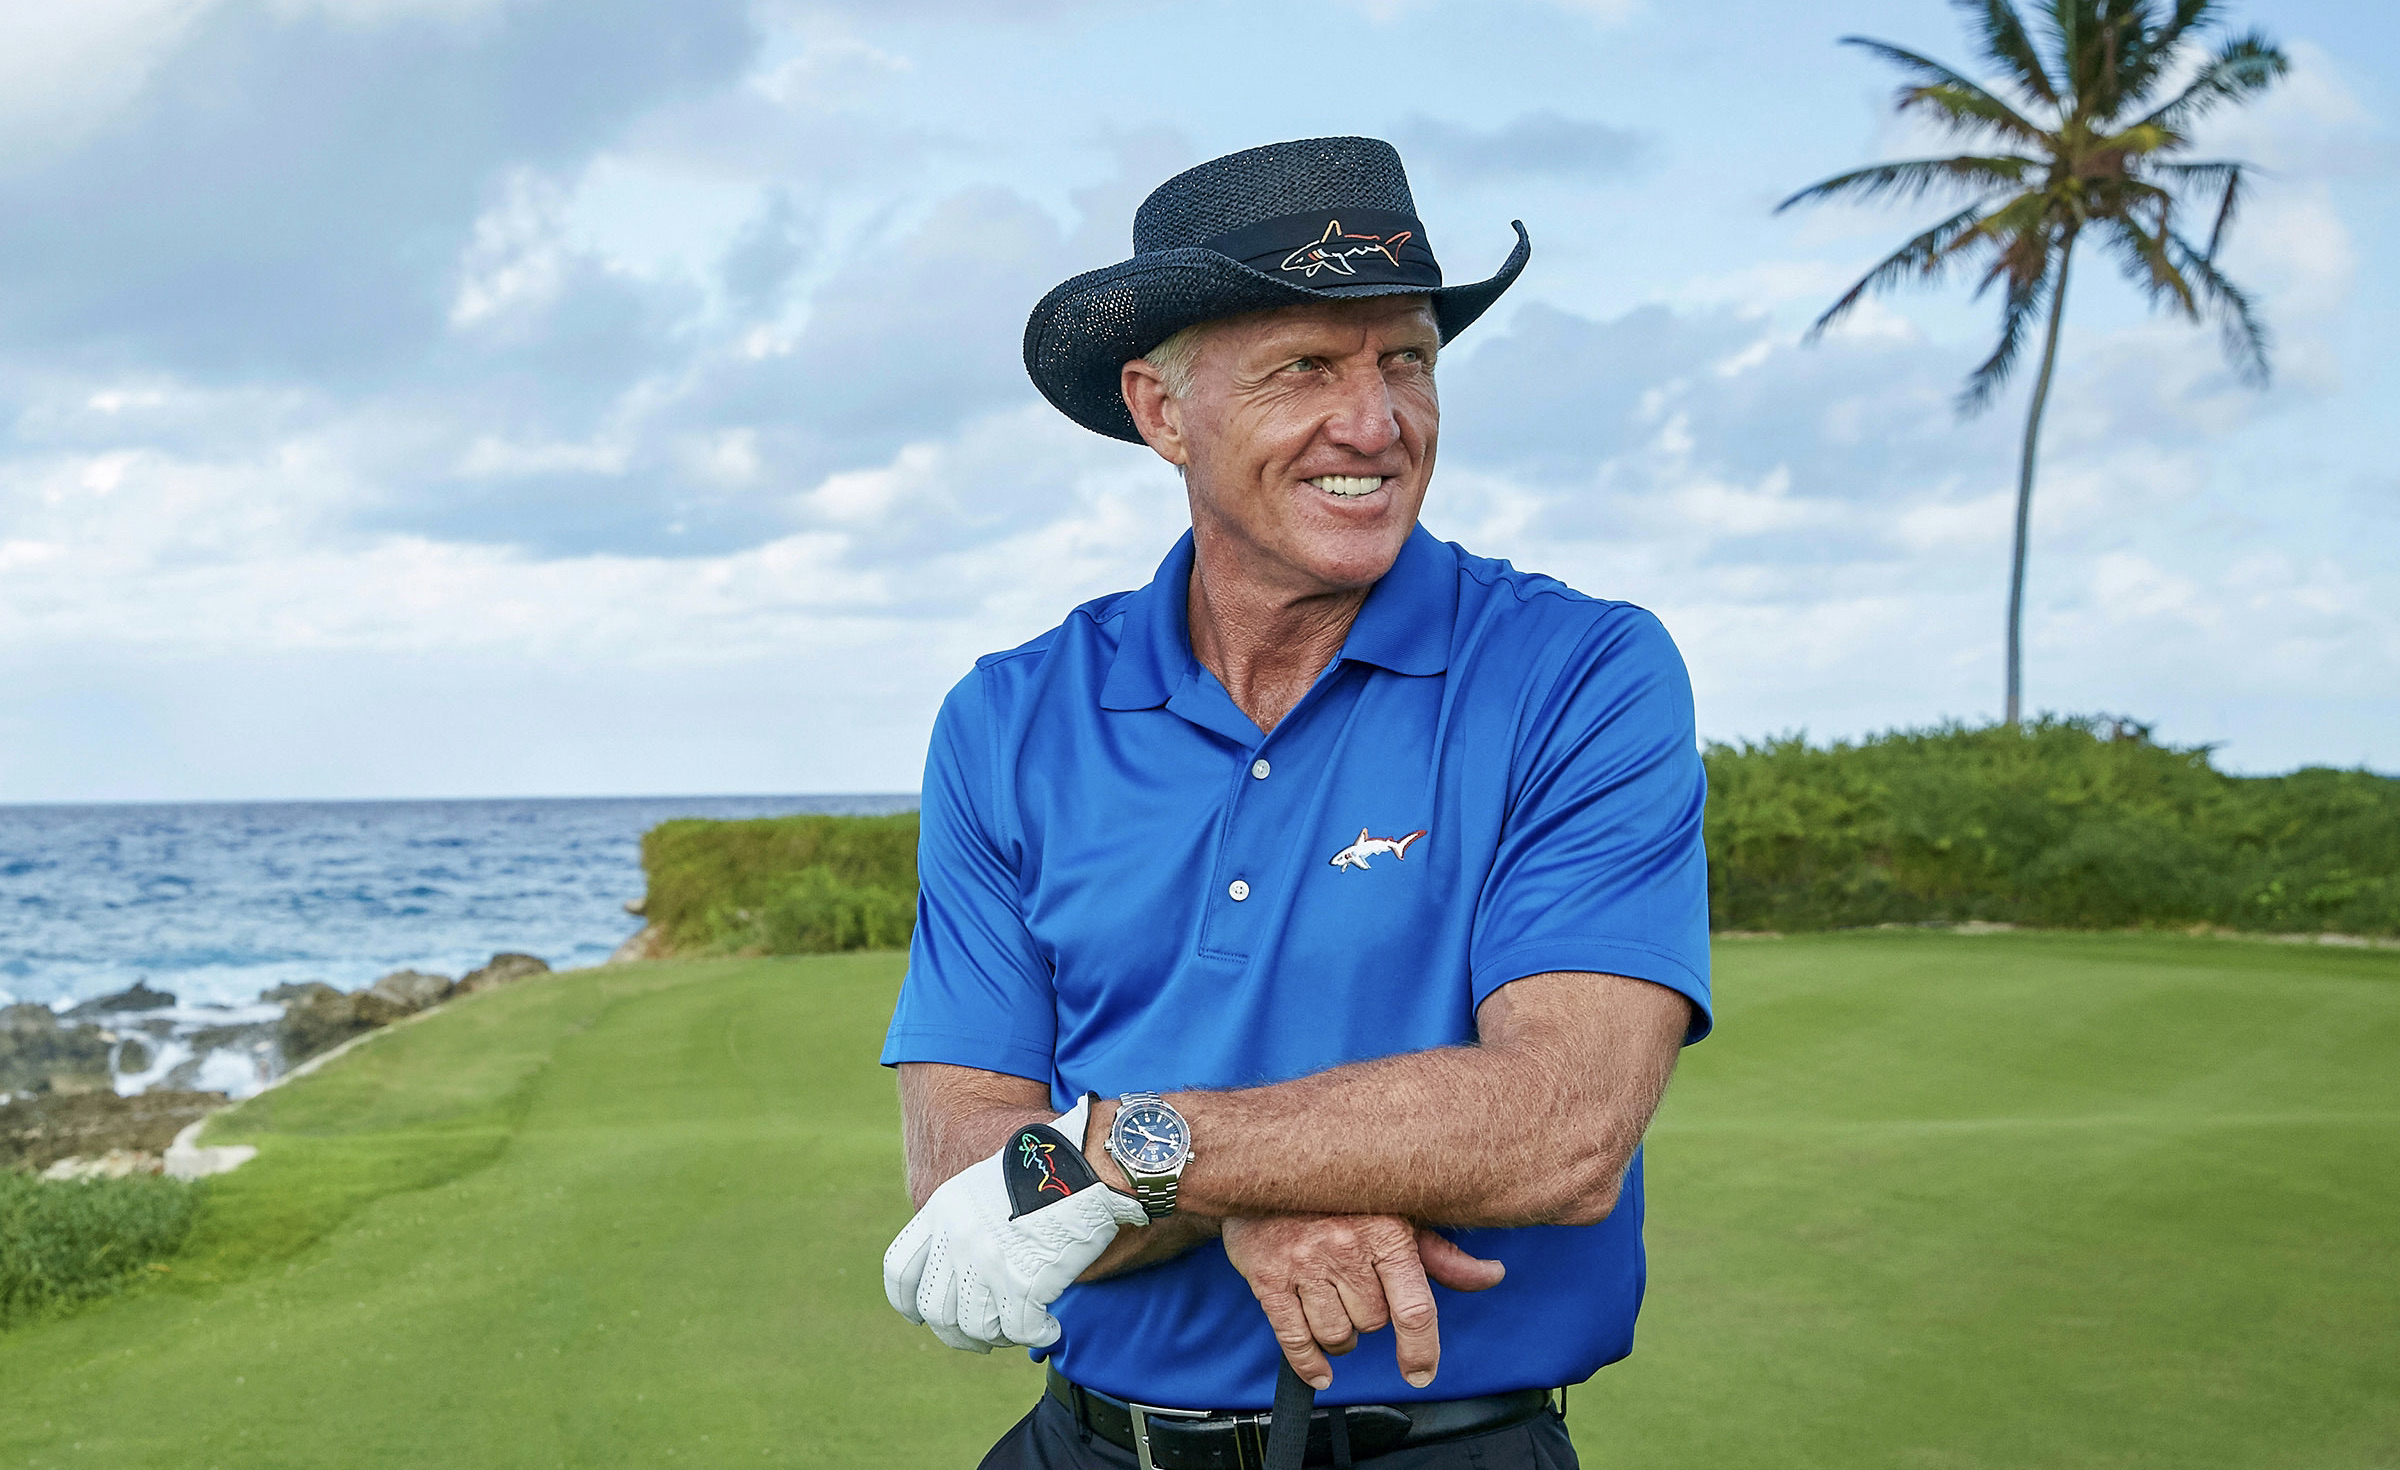 Greg Norman Golf apparel available at Golfbase.co.uk!, Train, Play, Chill, Shop Now!